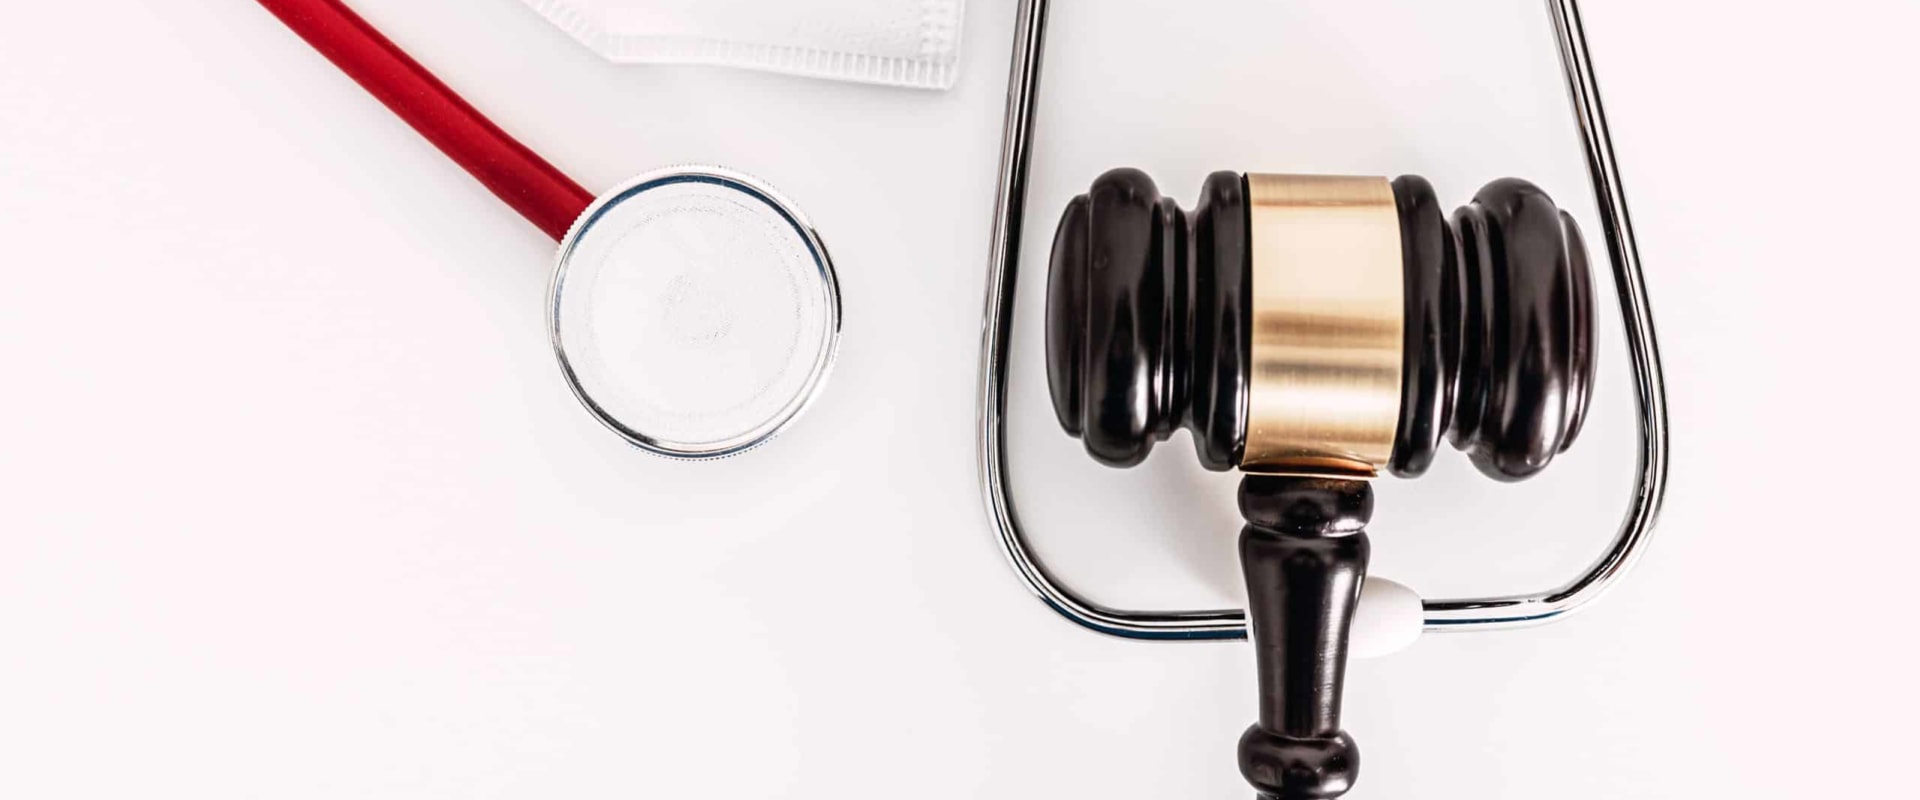 What are the five most common types of medical malpractice?